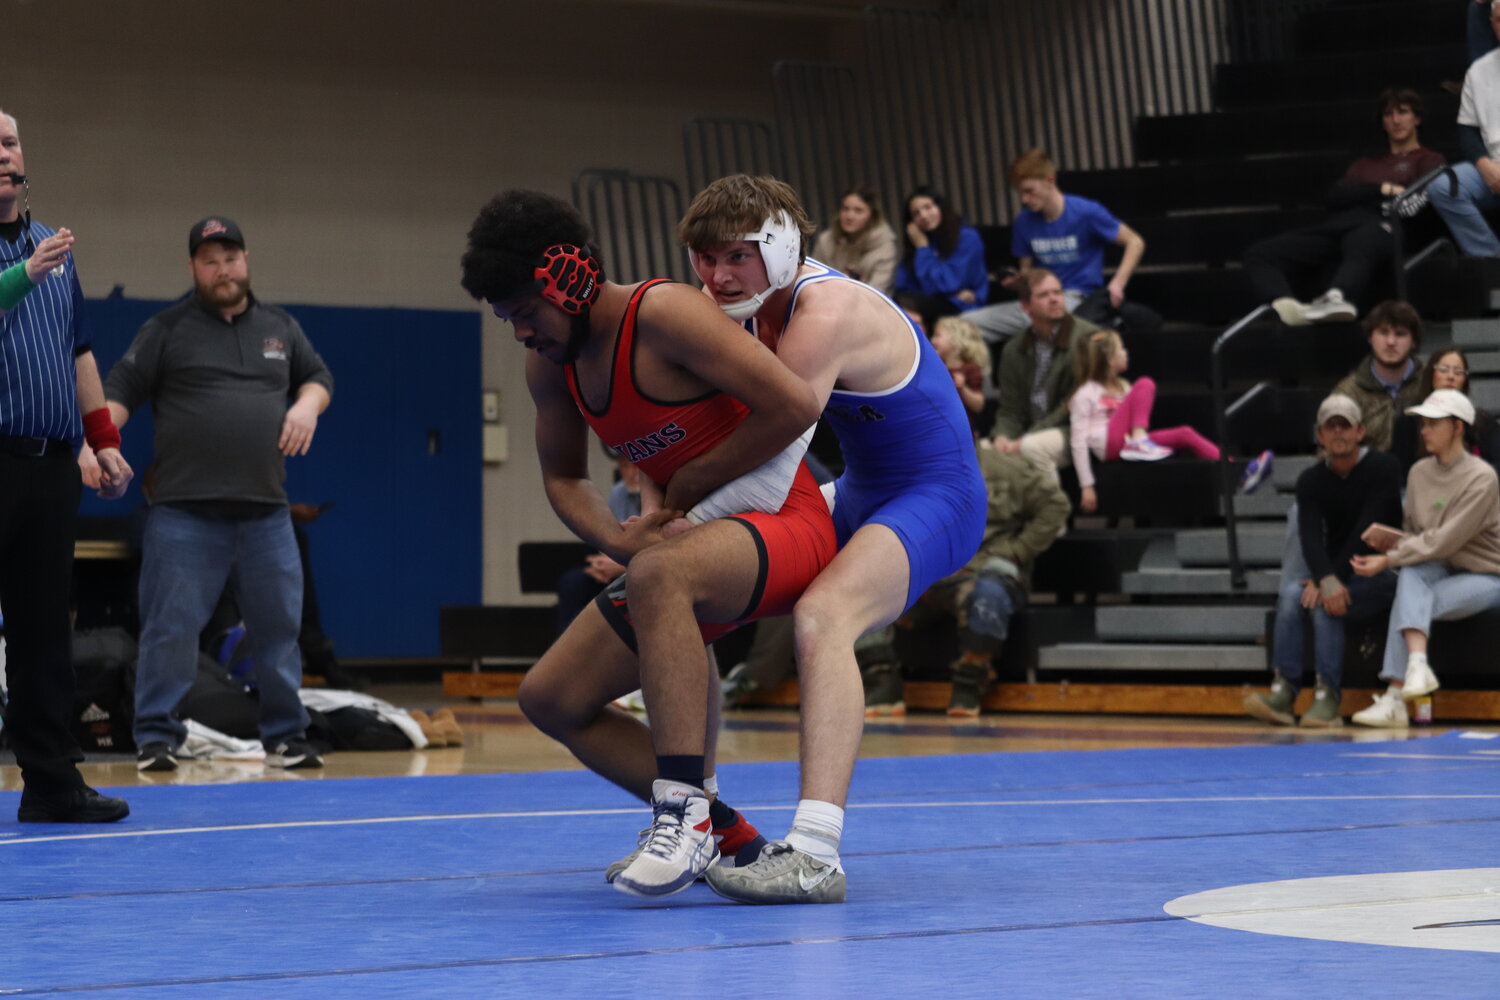 The Gilbert wrestling team clinched a spot in the 3A duals state title match on Saturday after beating Dreher.